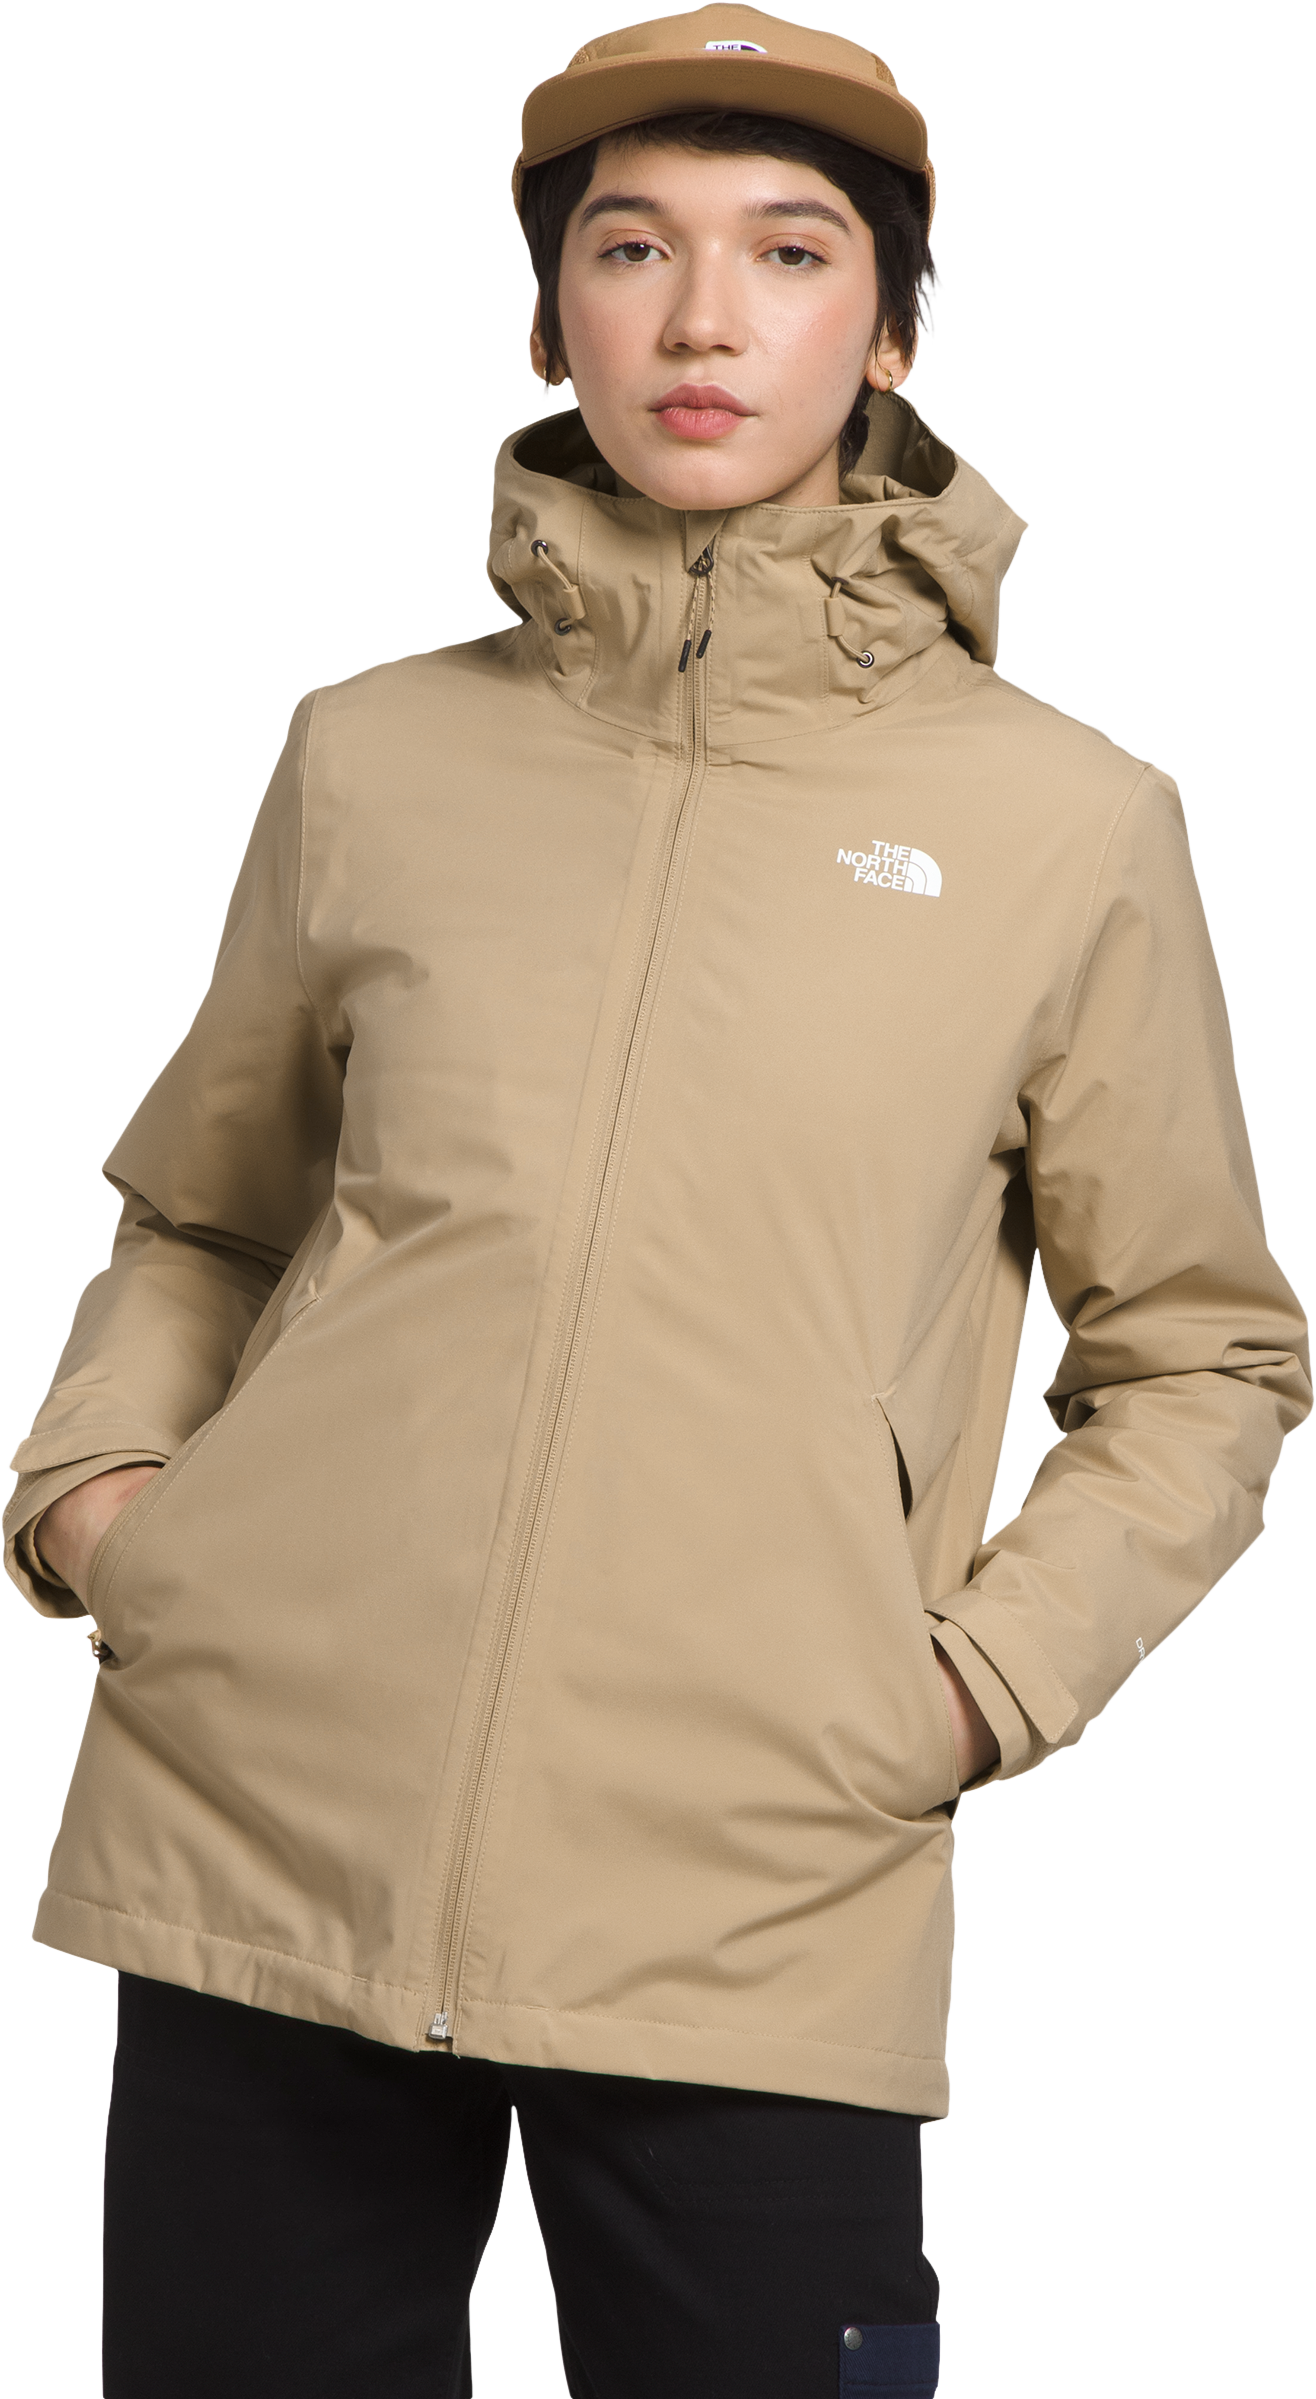 The North Face Carto Triclimate 3-in-1 Jacket for Ladies - Khaki Stone - L